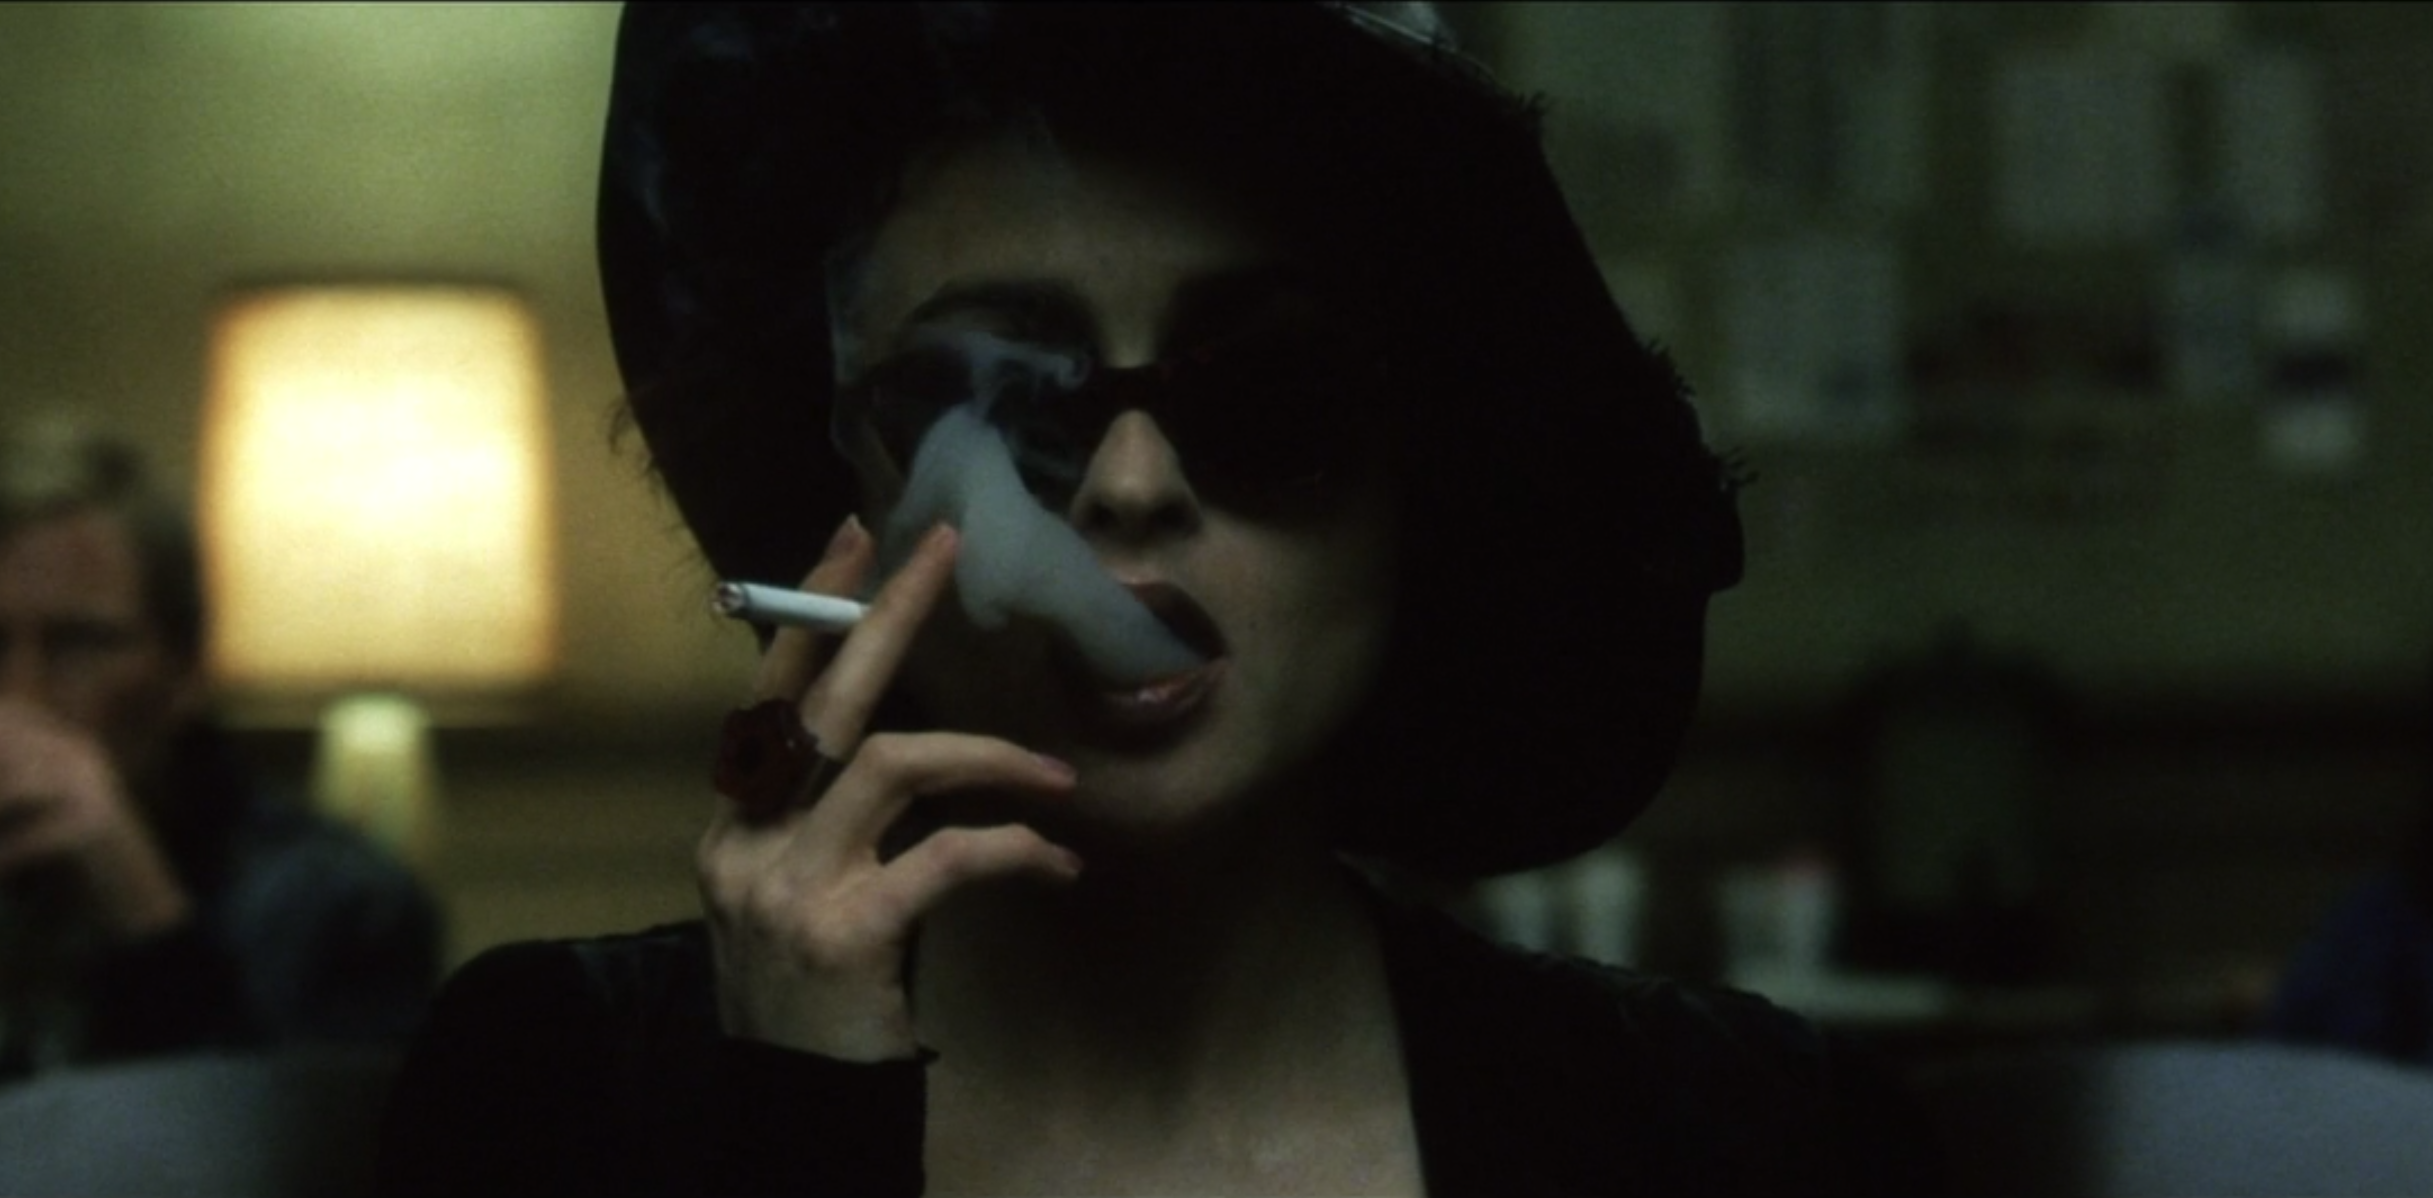 How The Flamboyant Fashion In Fight Club Defied The Status Quo I D